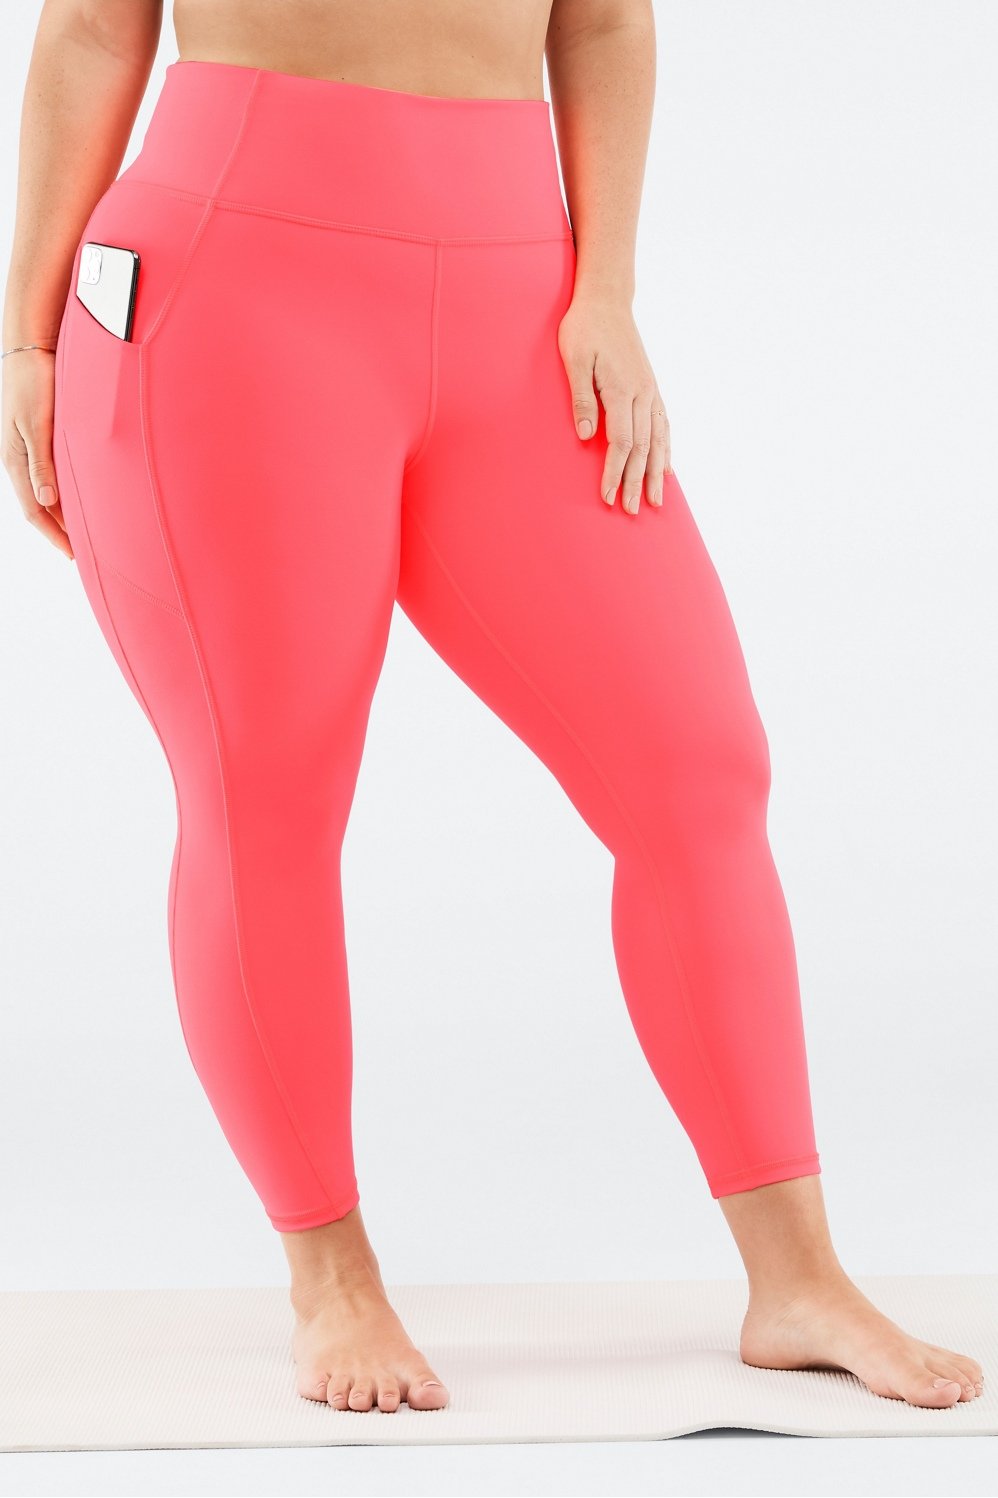 Fabletics ‼️ Cashel Foldover PureLuxe Legging‼️ Size M - $60 - From Layna